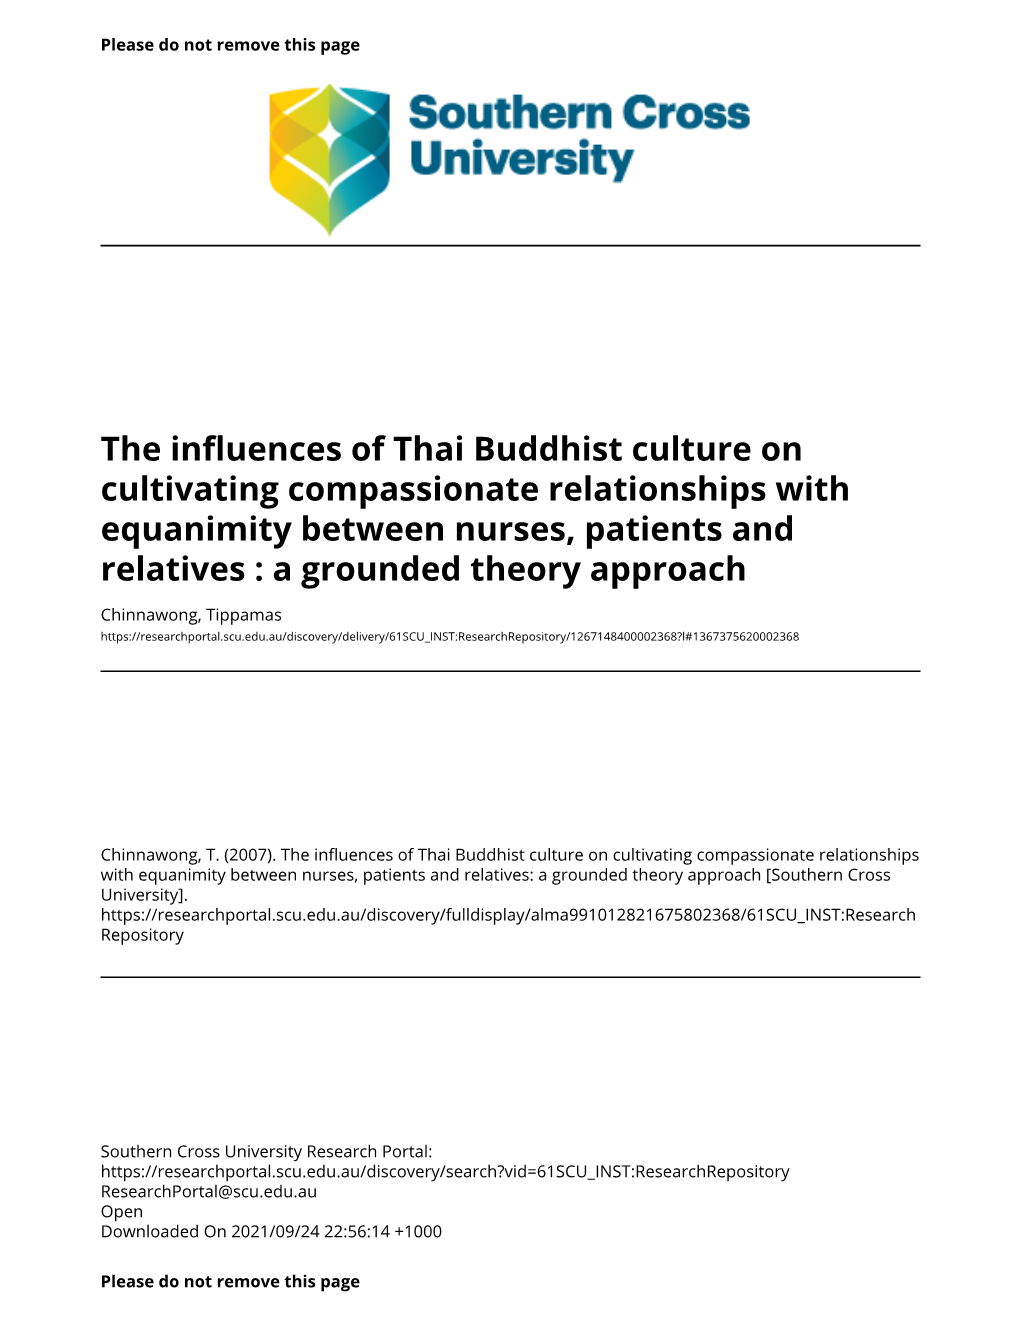 The Influences of Thai Buddhist Culture on Cultivating Compassionate Relationships with Equanimity Between Nurses, Patients and Relatives : a Grounded Theory Approach